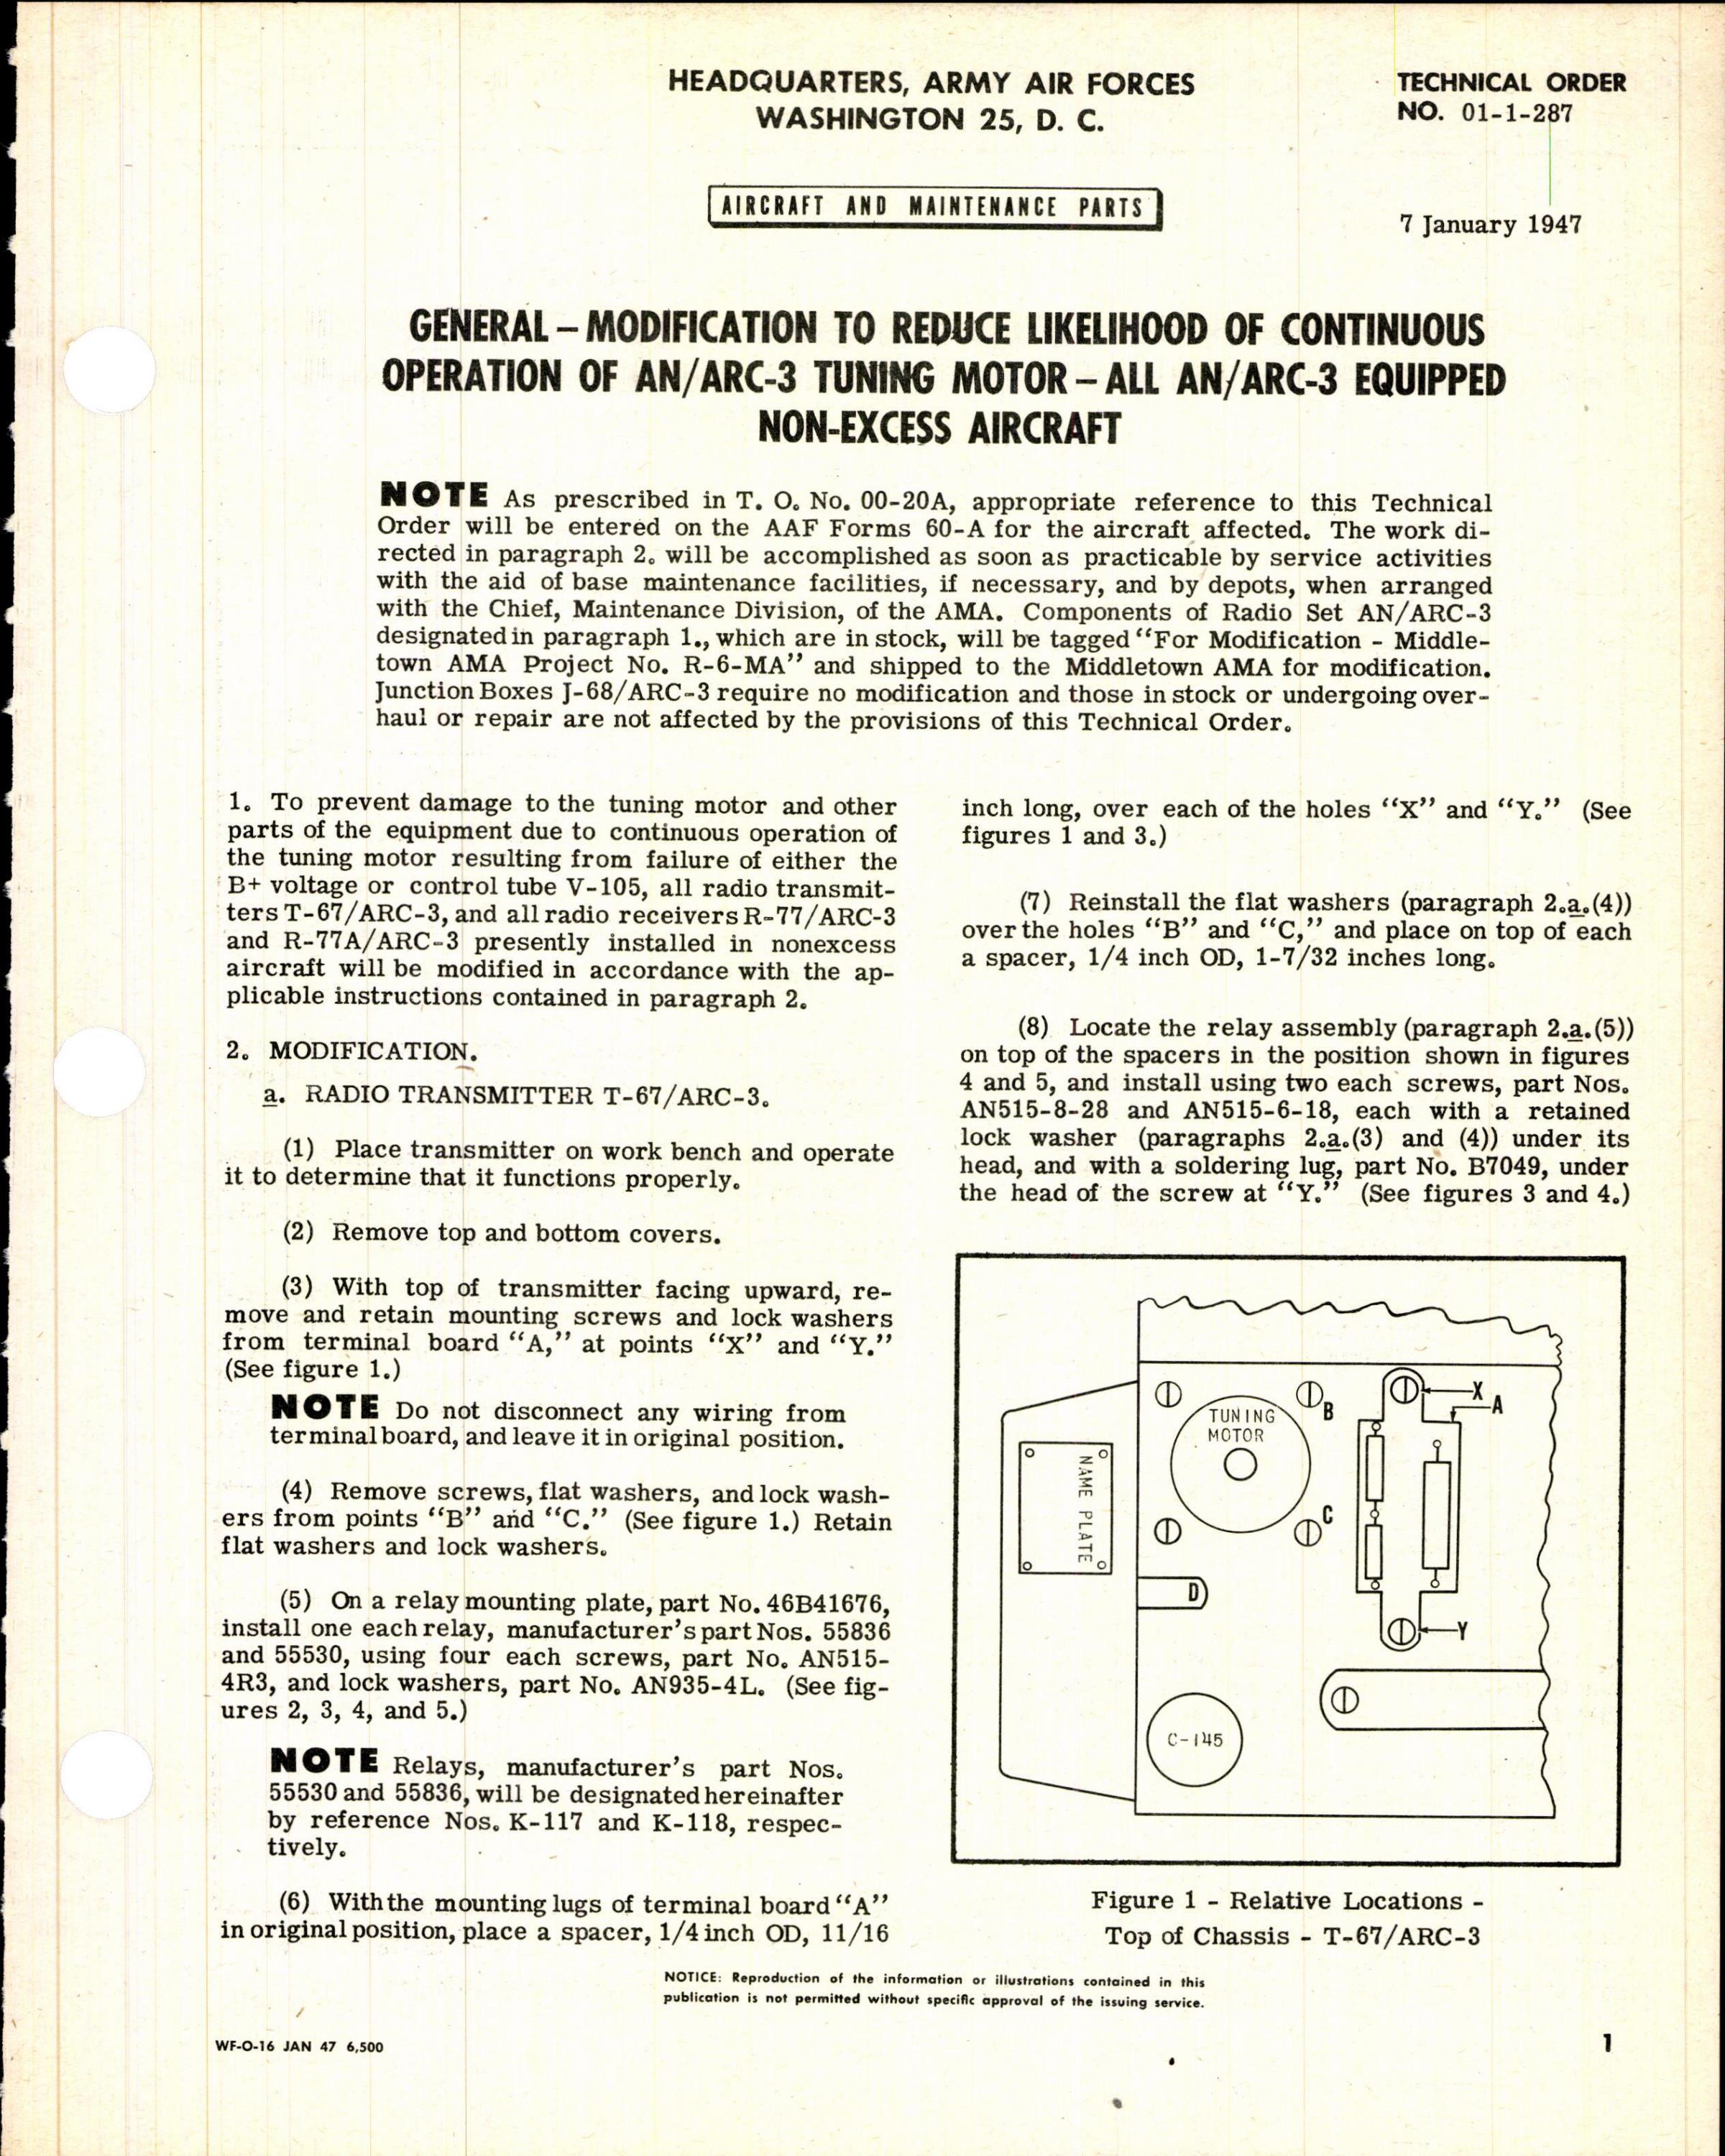 Sample page 1 from AirCorps Library document: Modification to Reduce Likelihood of Continuous Operation of AN/ARC-3 Tuning Motor